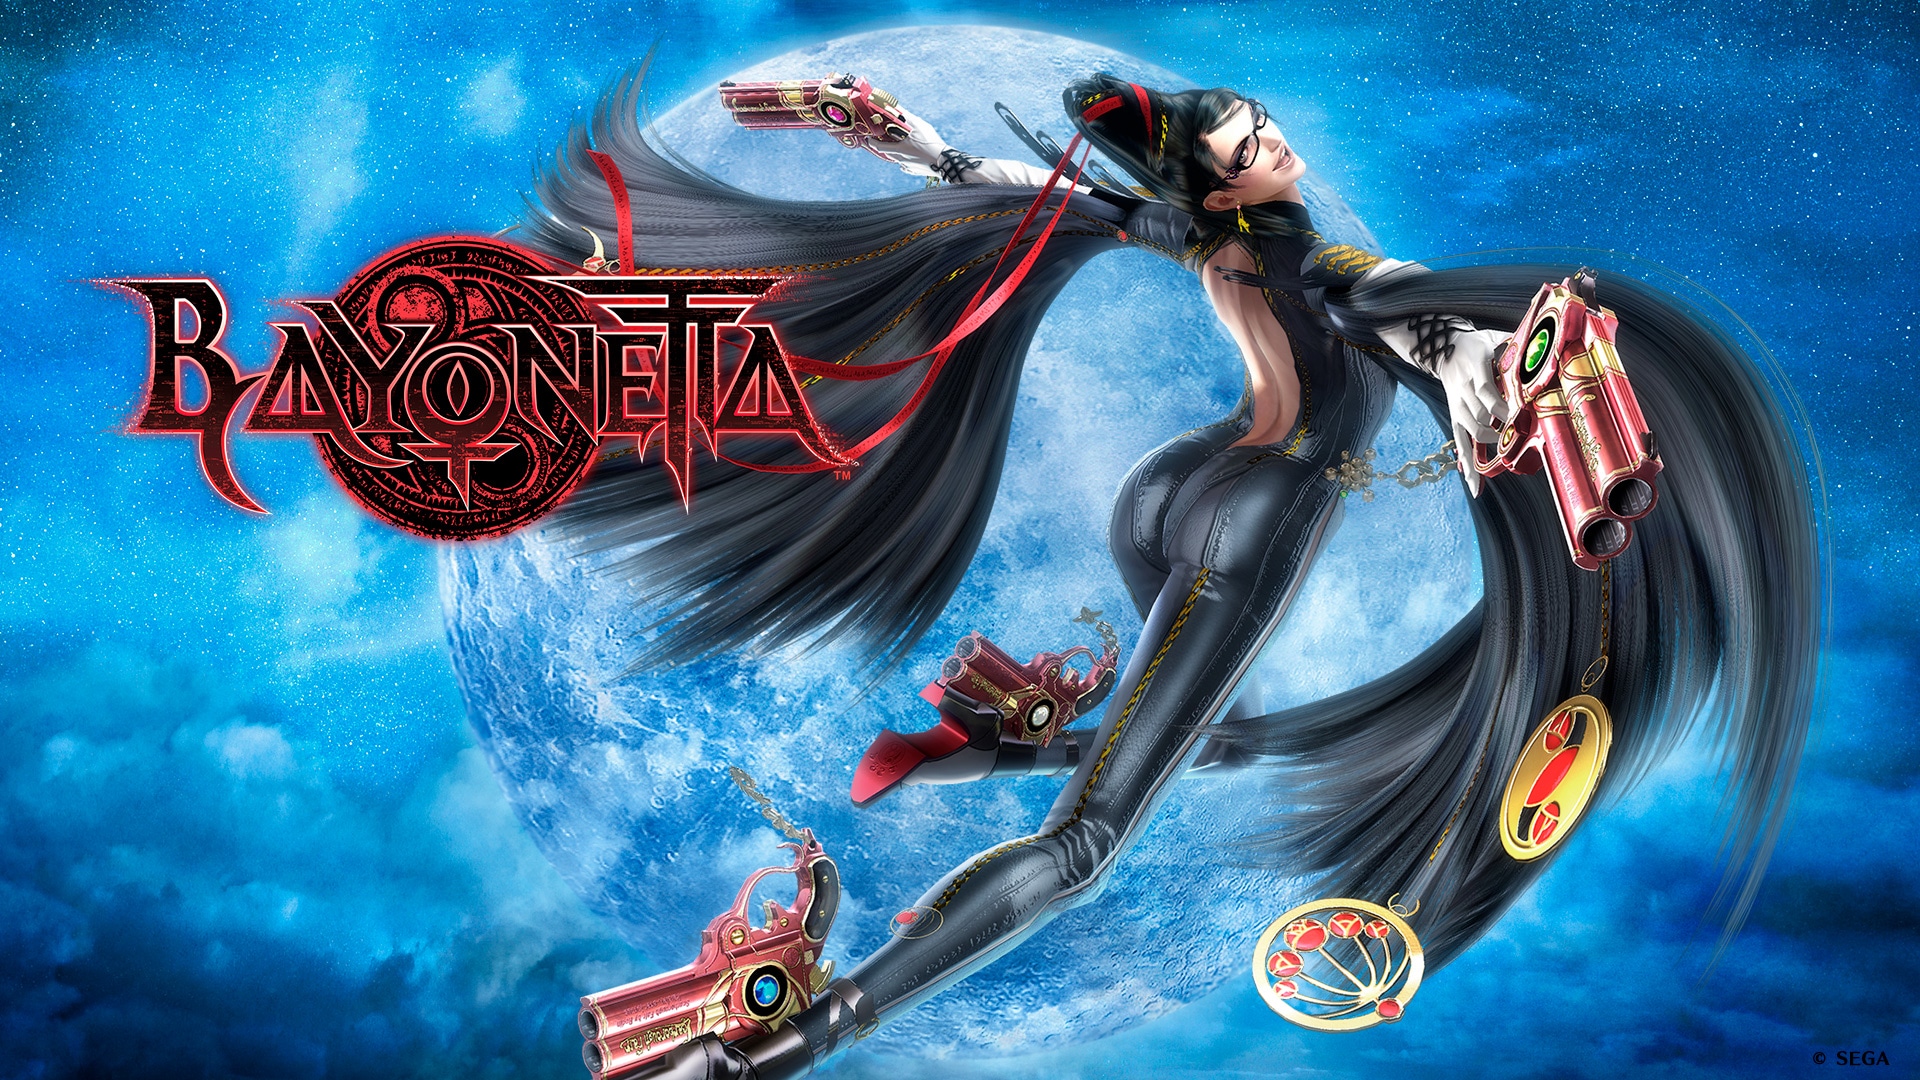 Humble Bundle Launches Awesome Games Pack Featuring 7 Games for $10; Bayonetta, Celeste, Bloodstained and More